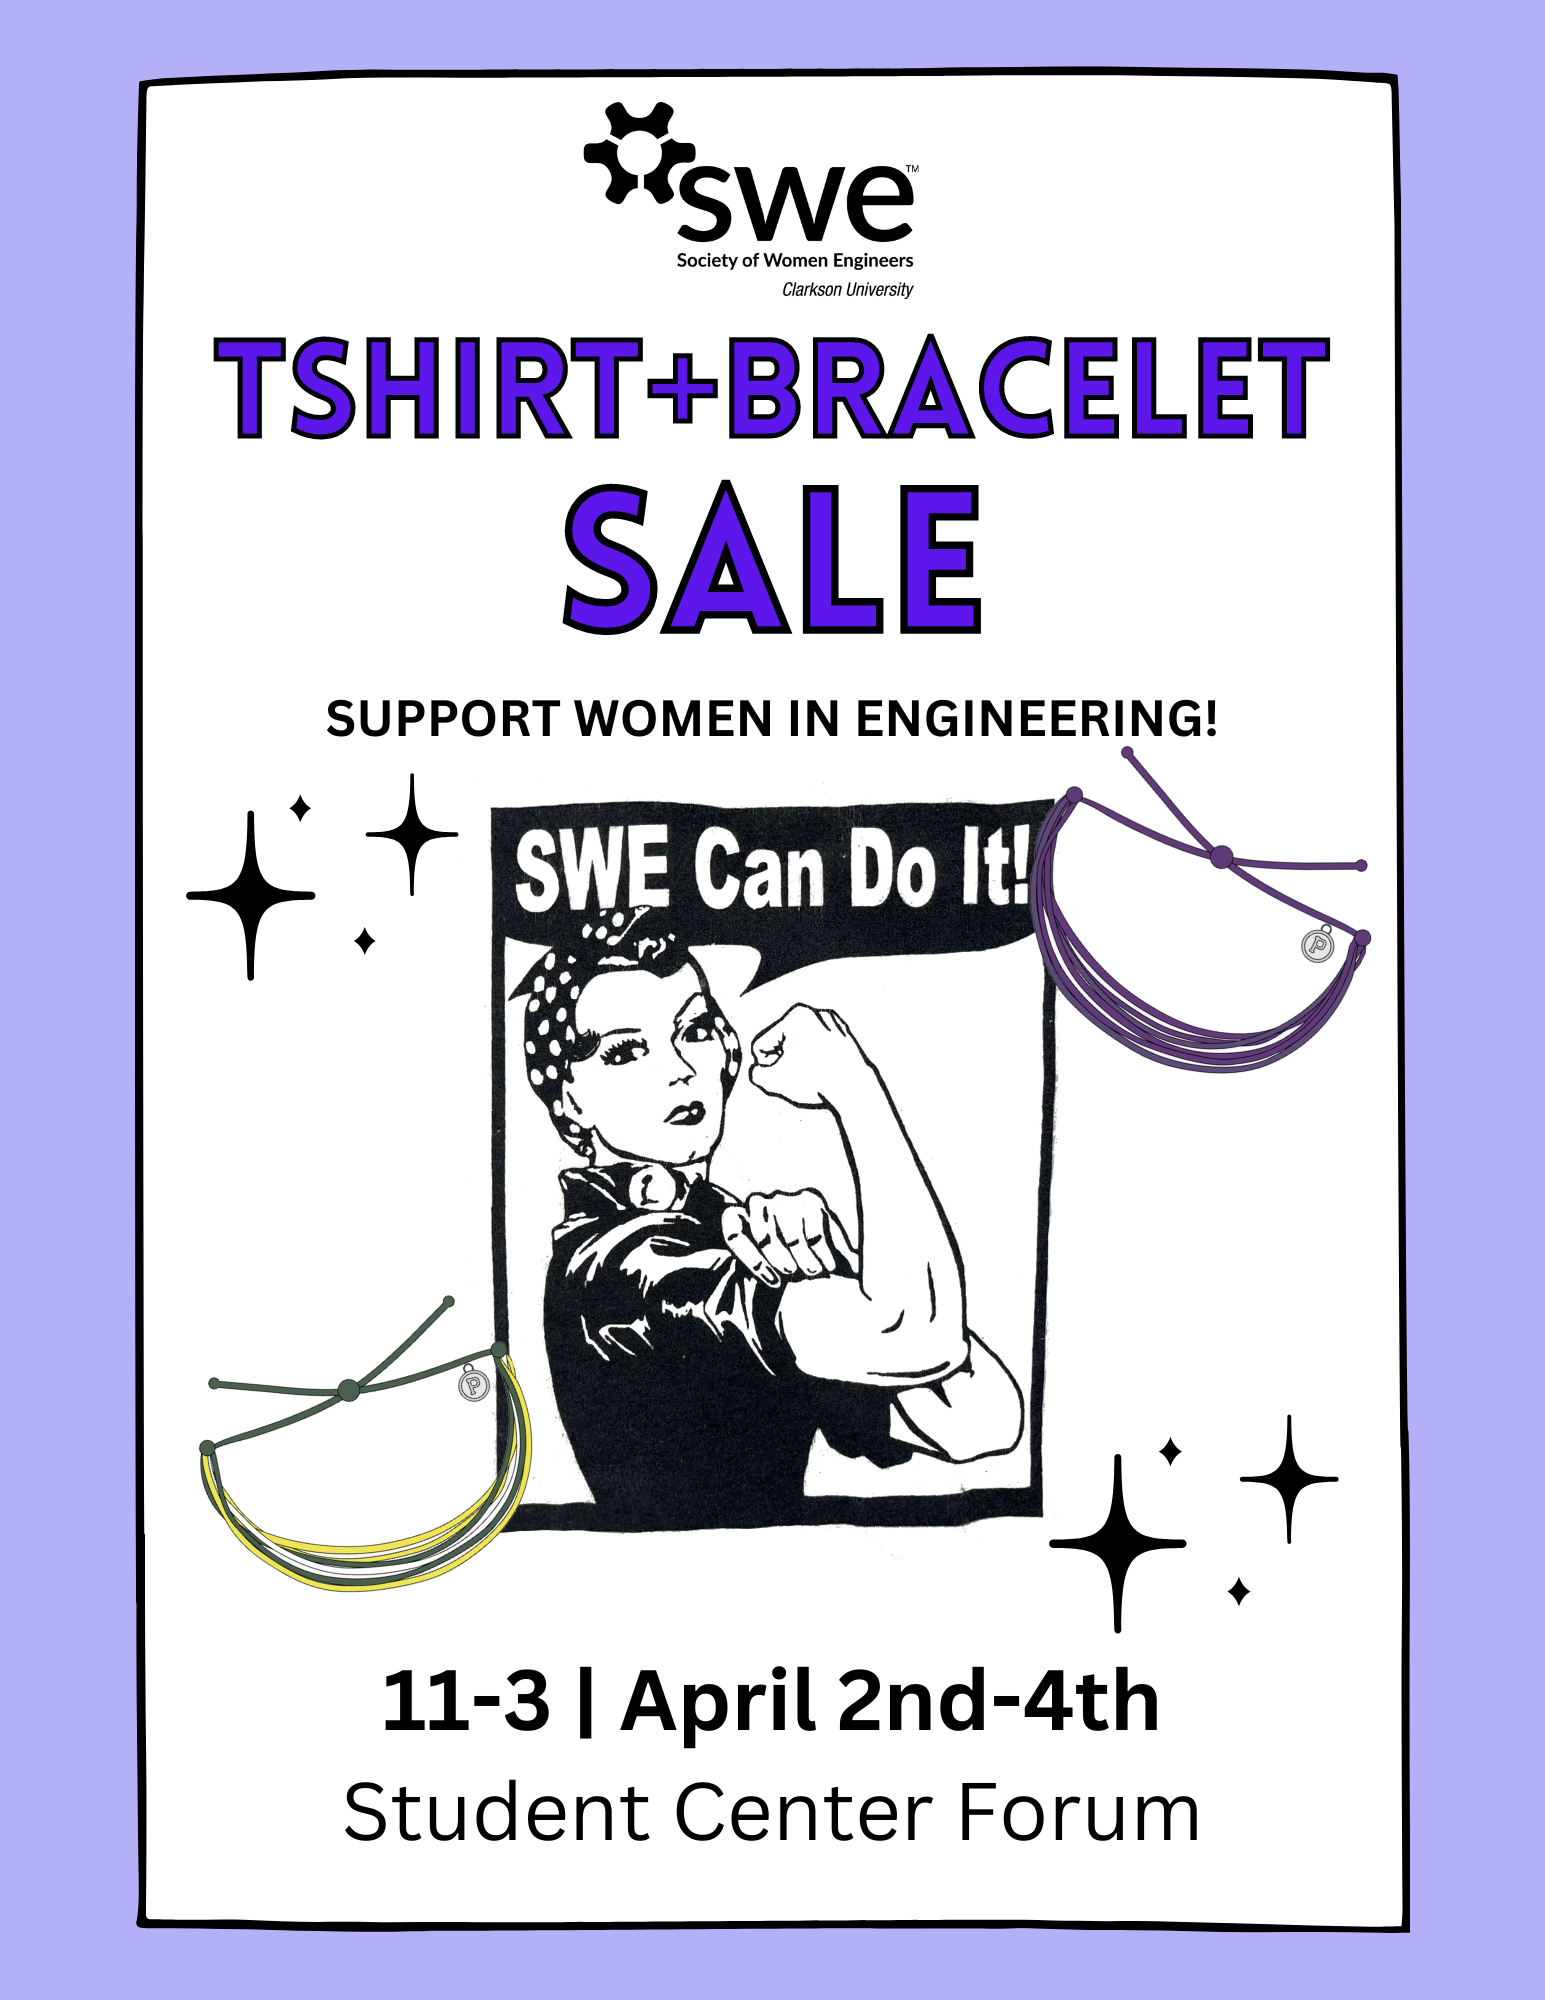 Society of Women Engineers T-Shirt and Bracelet Sale